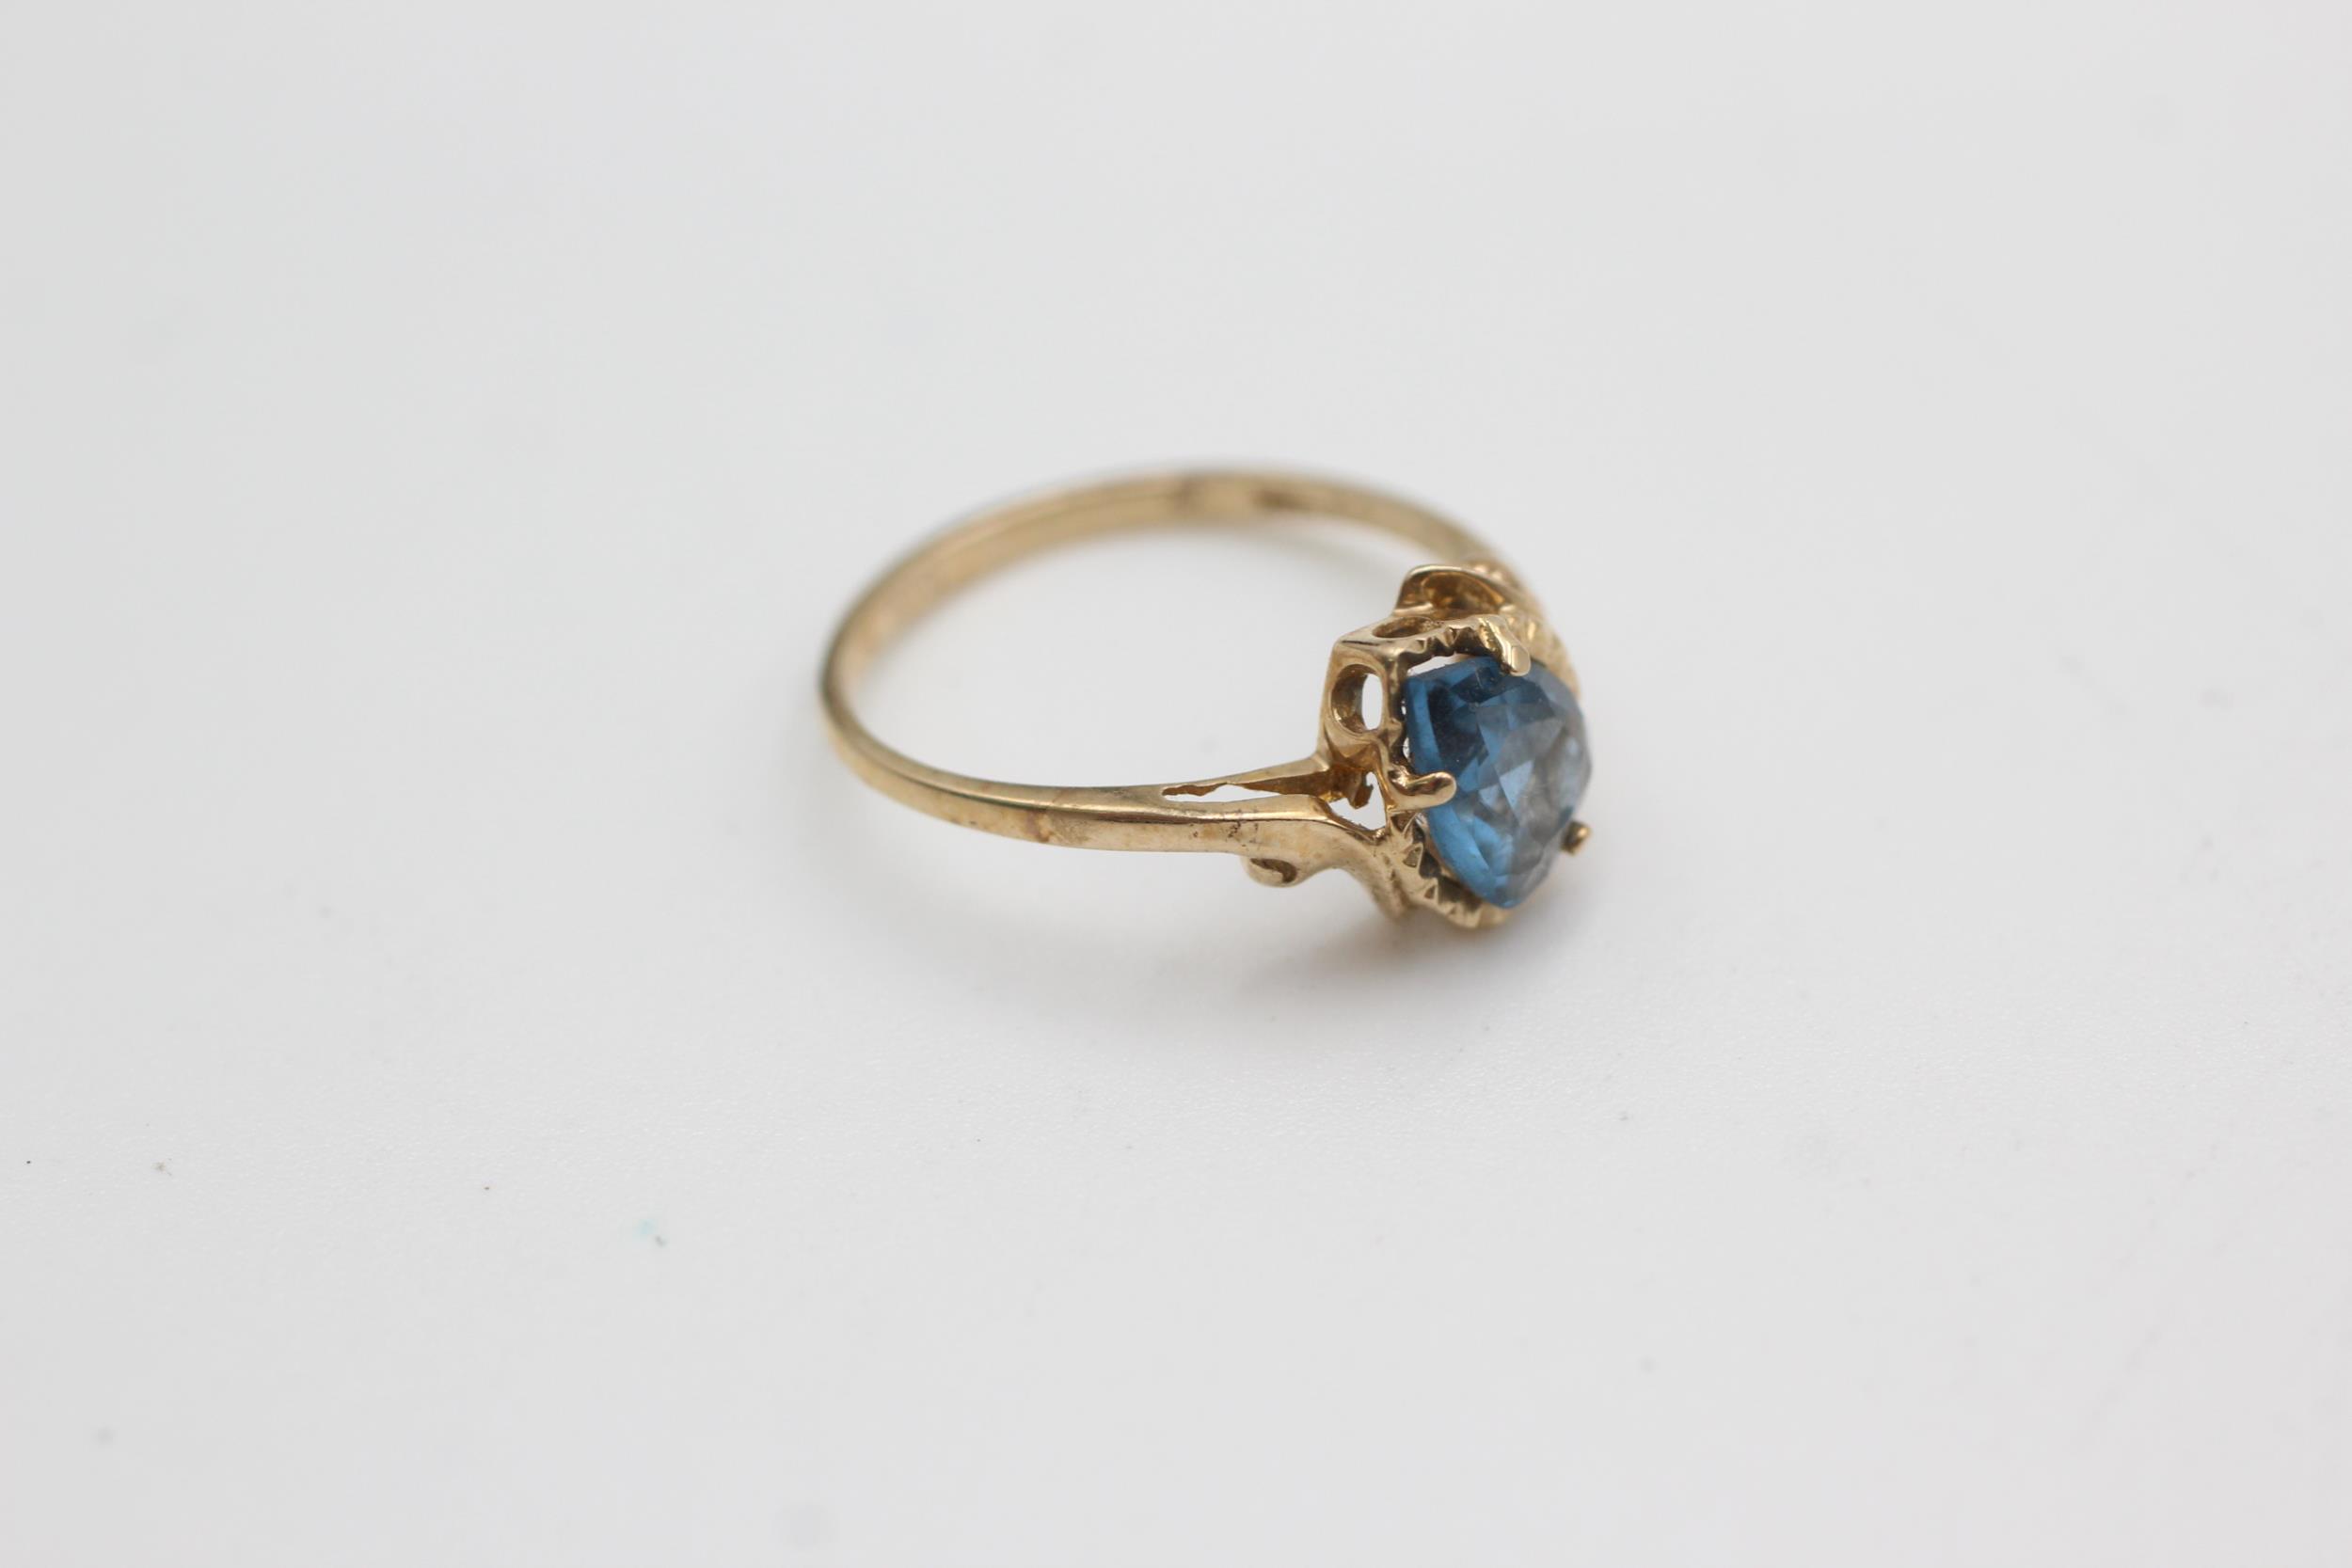 9ct gold vintage cocktail ring (1.5g) - Image 2 of 4